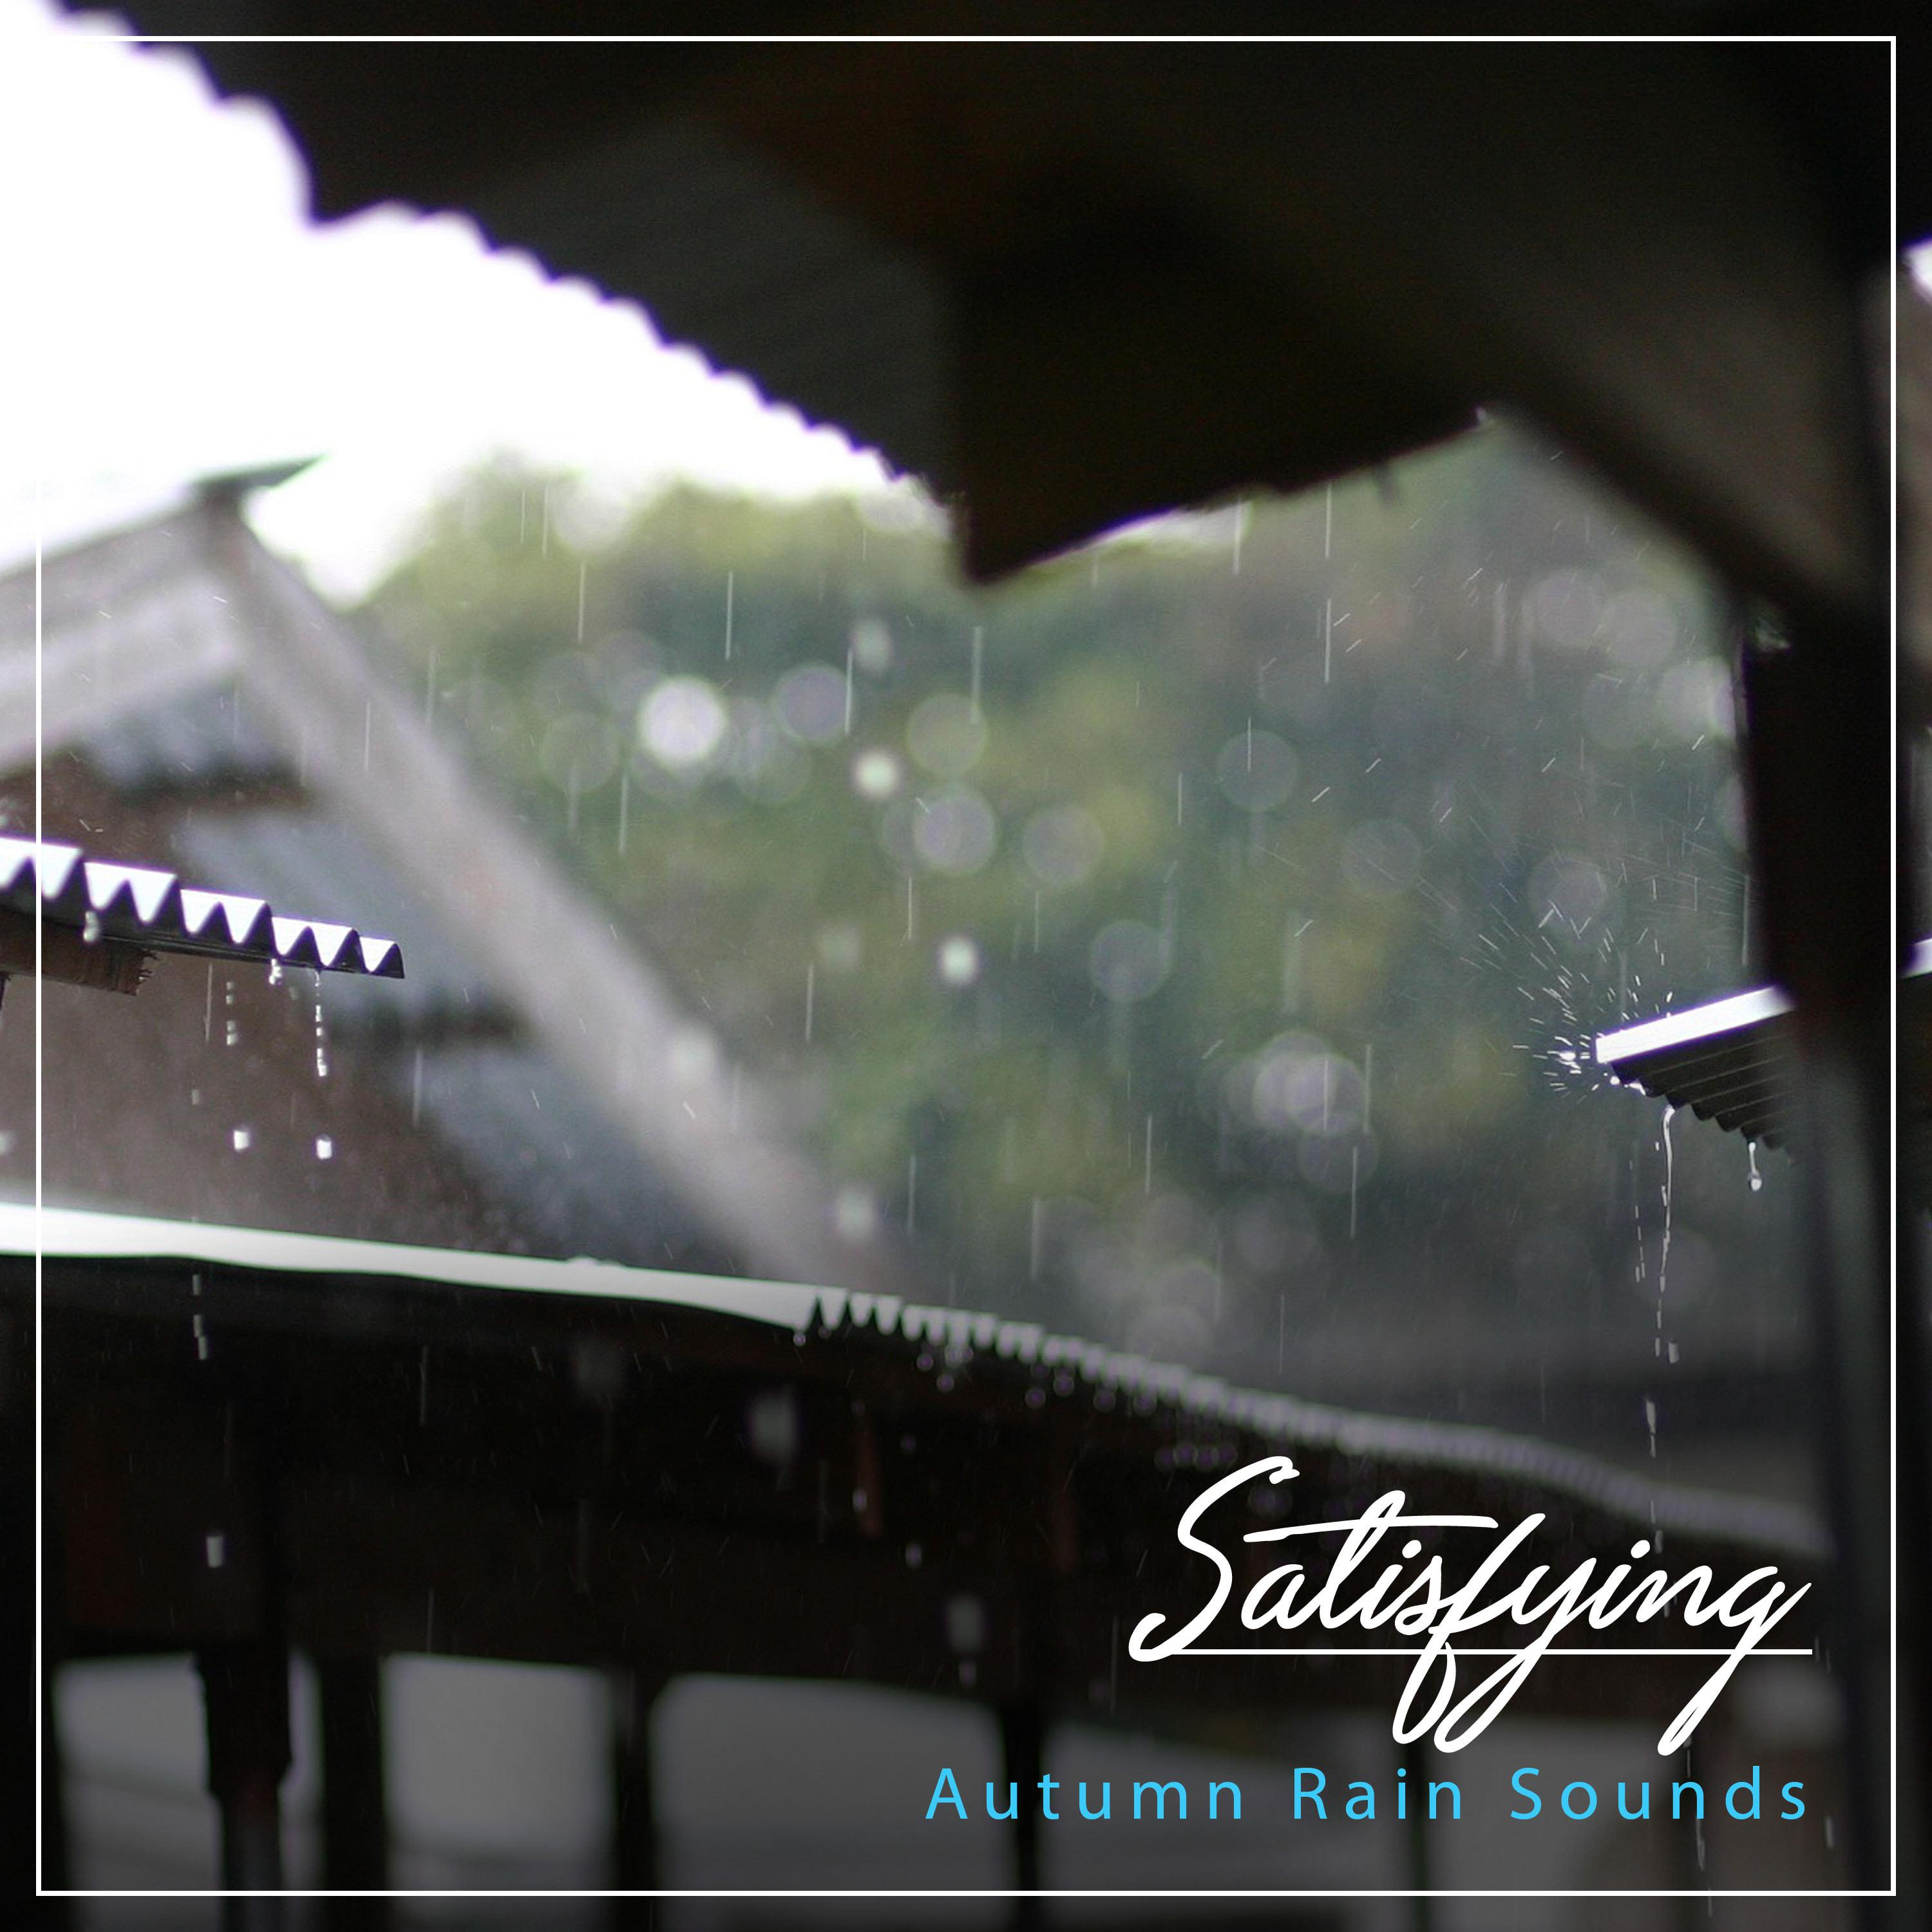 #18 Satisfying Autumn Rain Sounds from Mother Nature